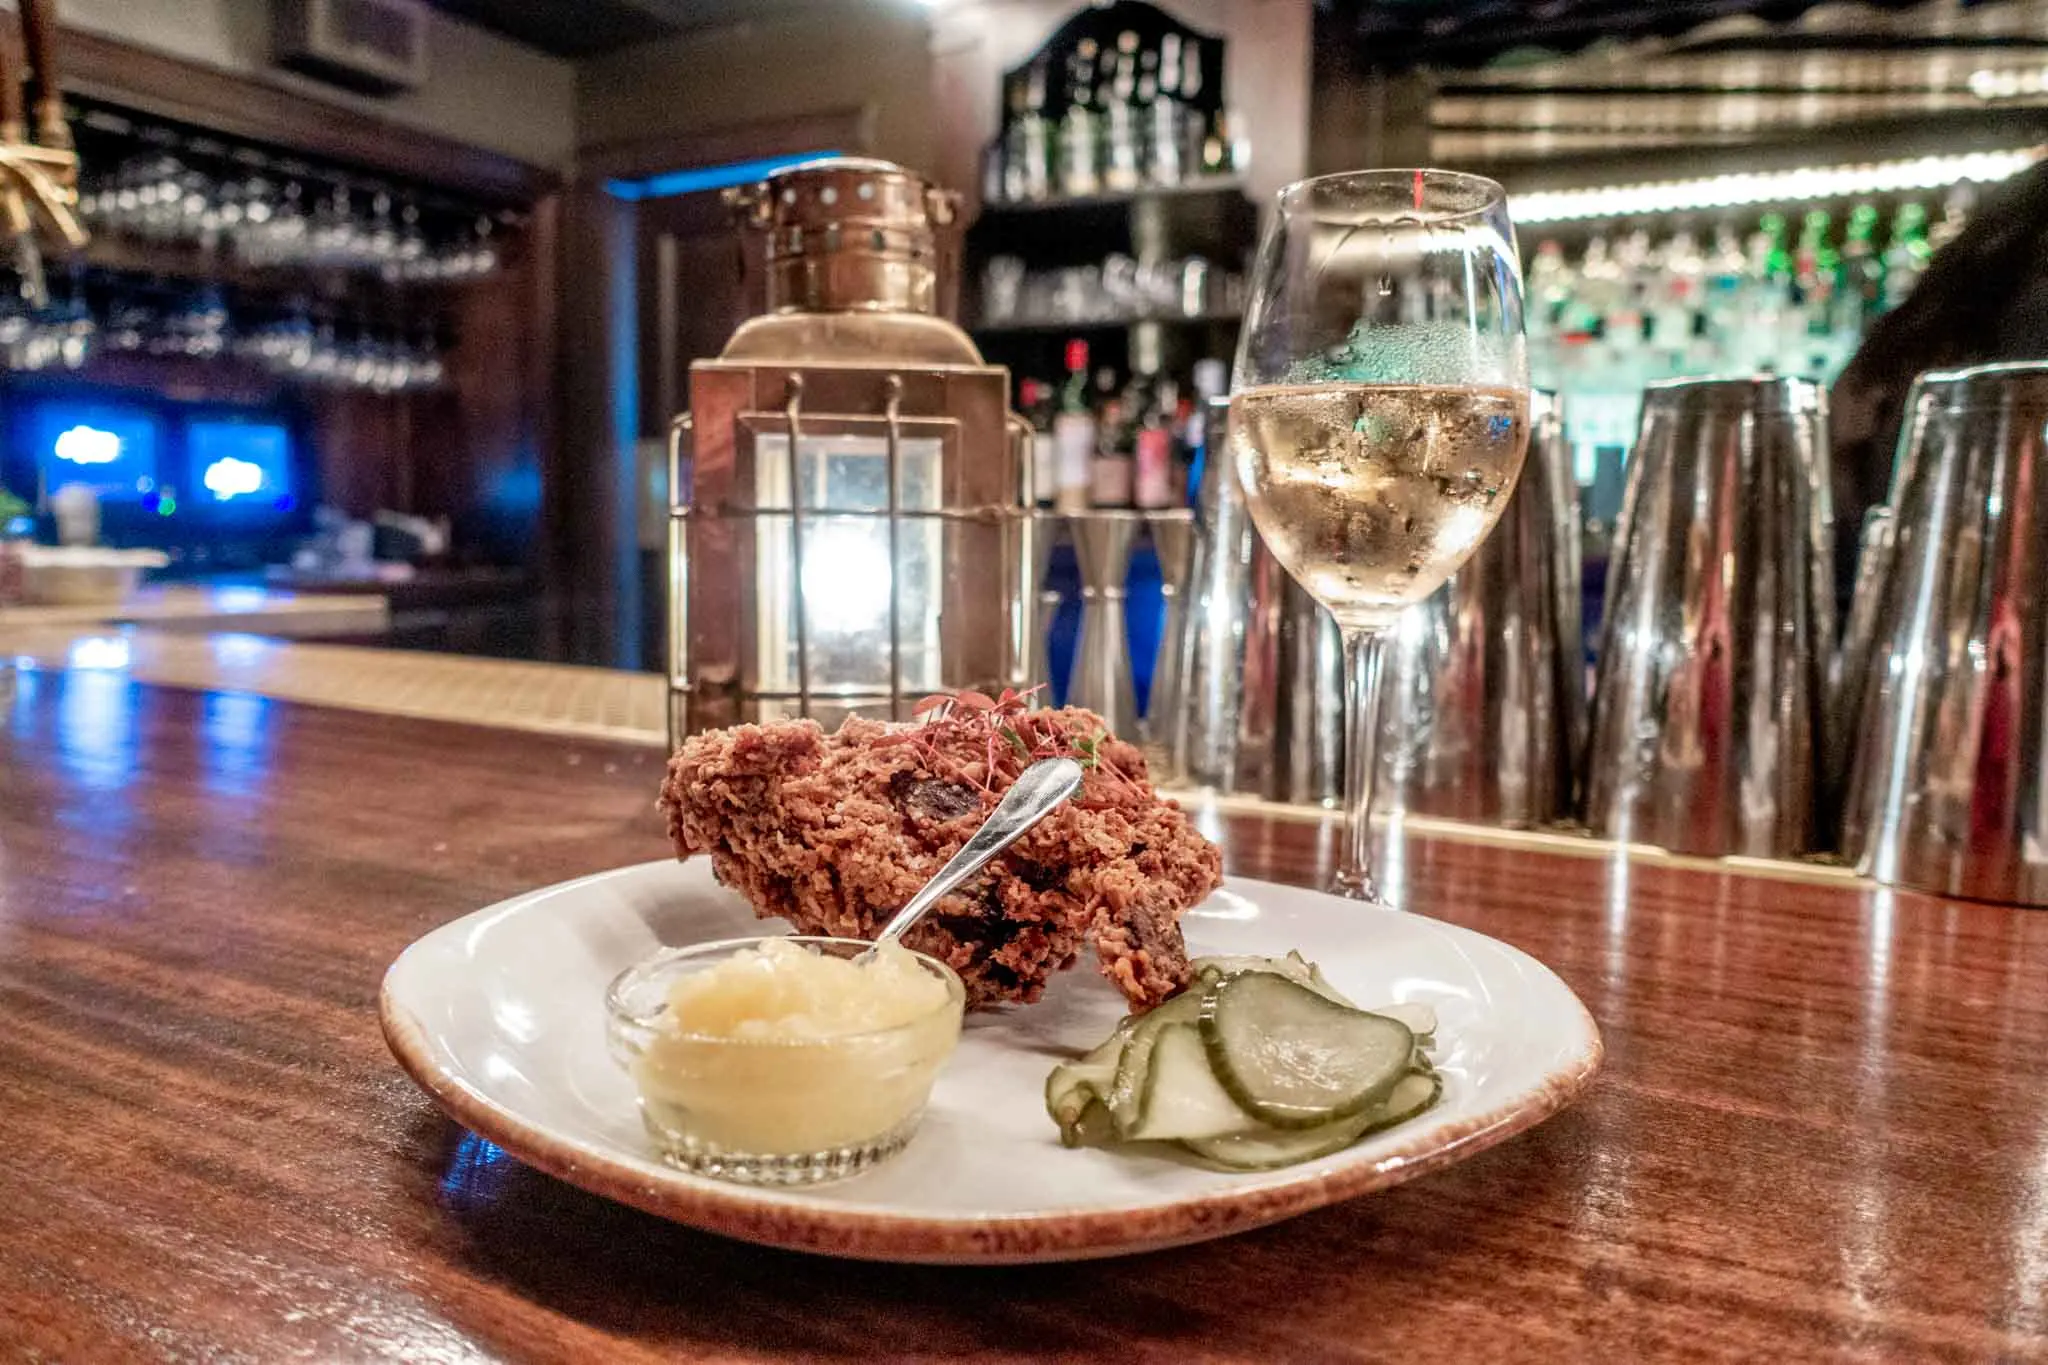 Fried chicken and pickles on a plate with a glass of champagne